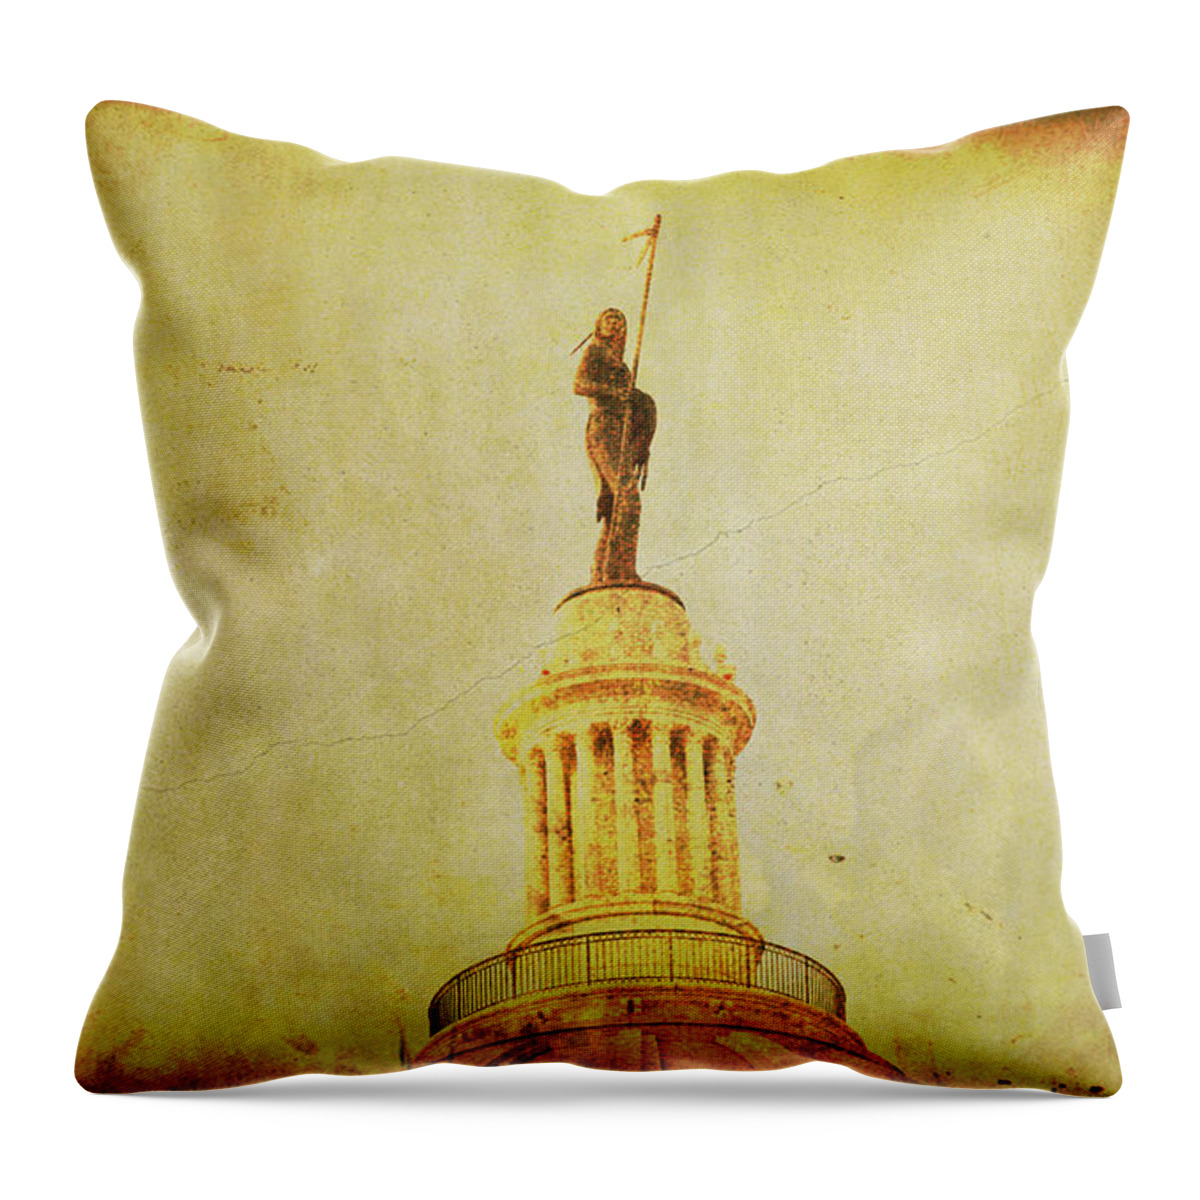 Oklahoma Throw Pillow featuring the photograph Time Honored by Toni Hopper